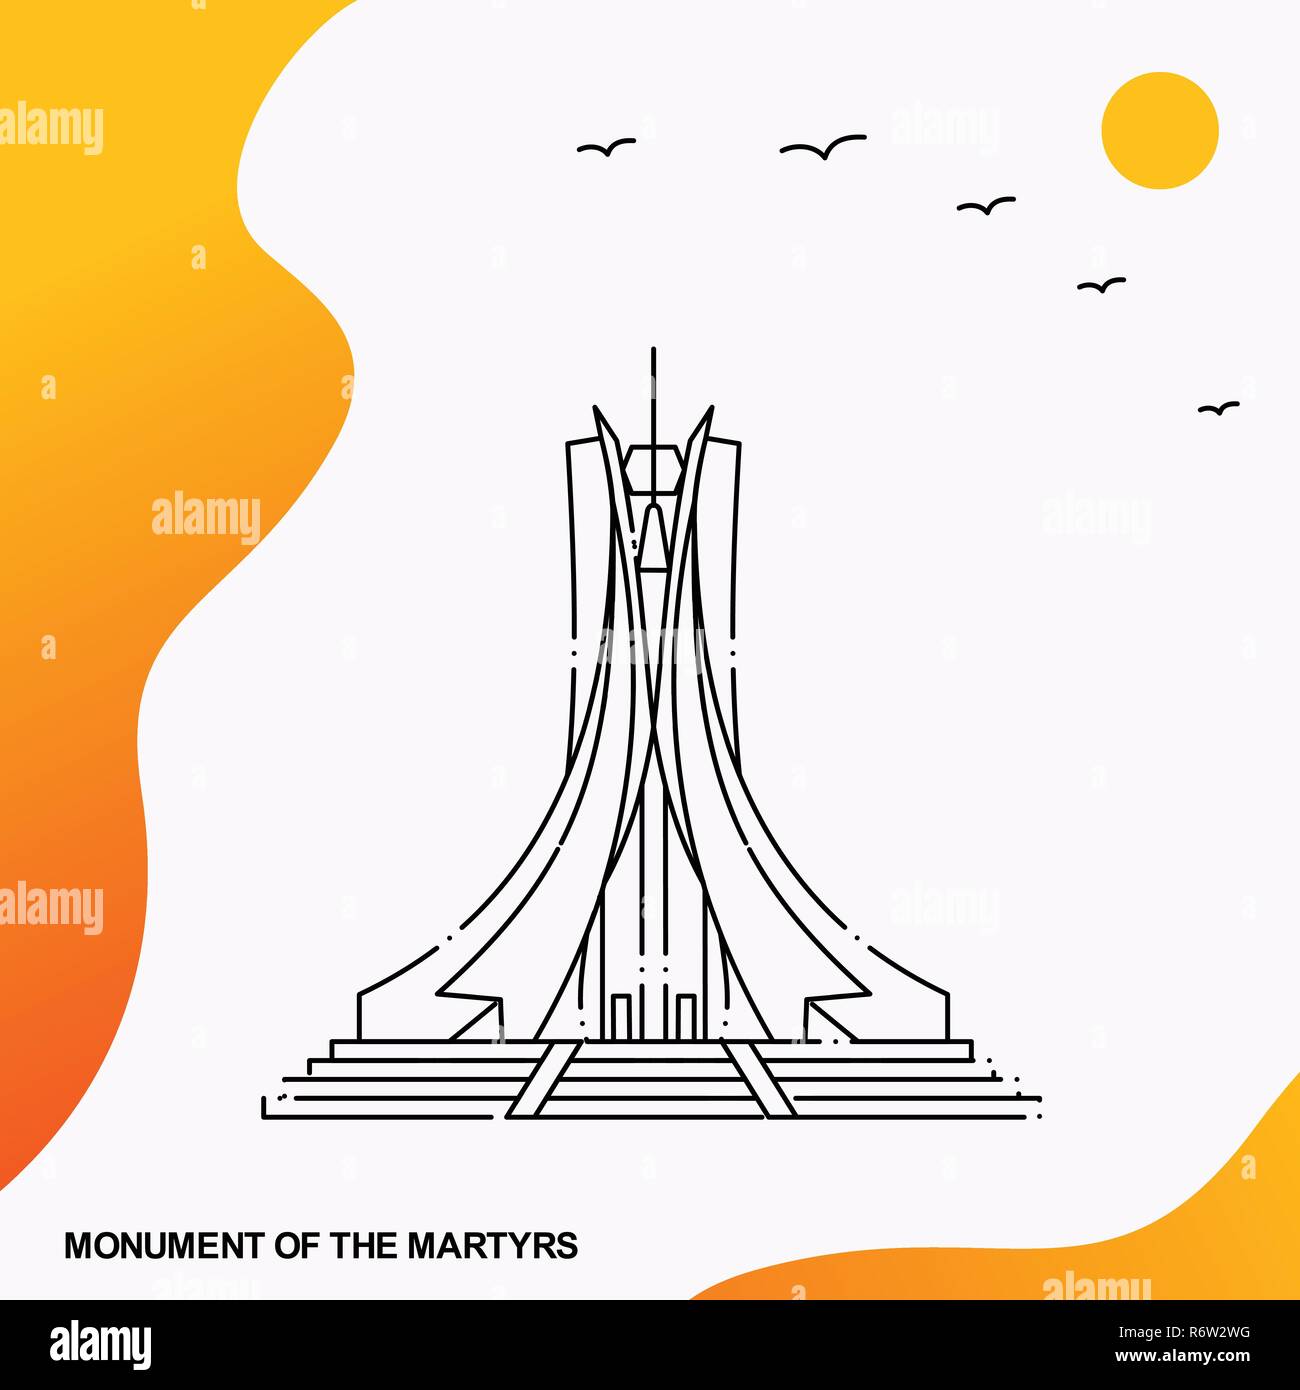 Travel MONUMENT OF THE MARTYRS Poster Template Stock Vector